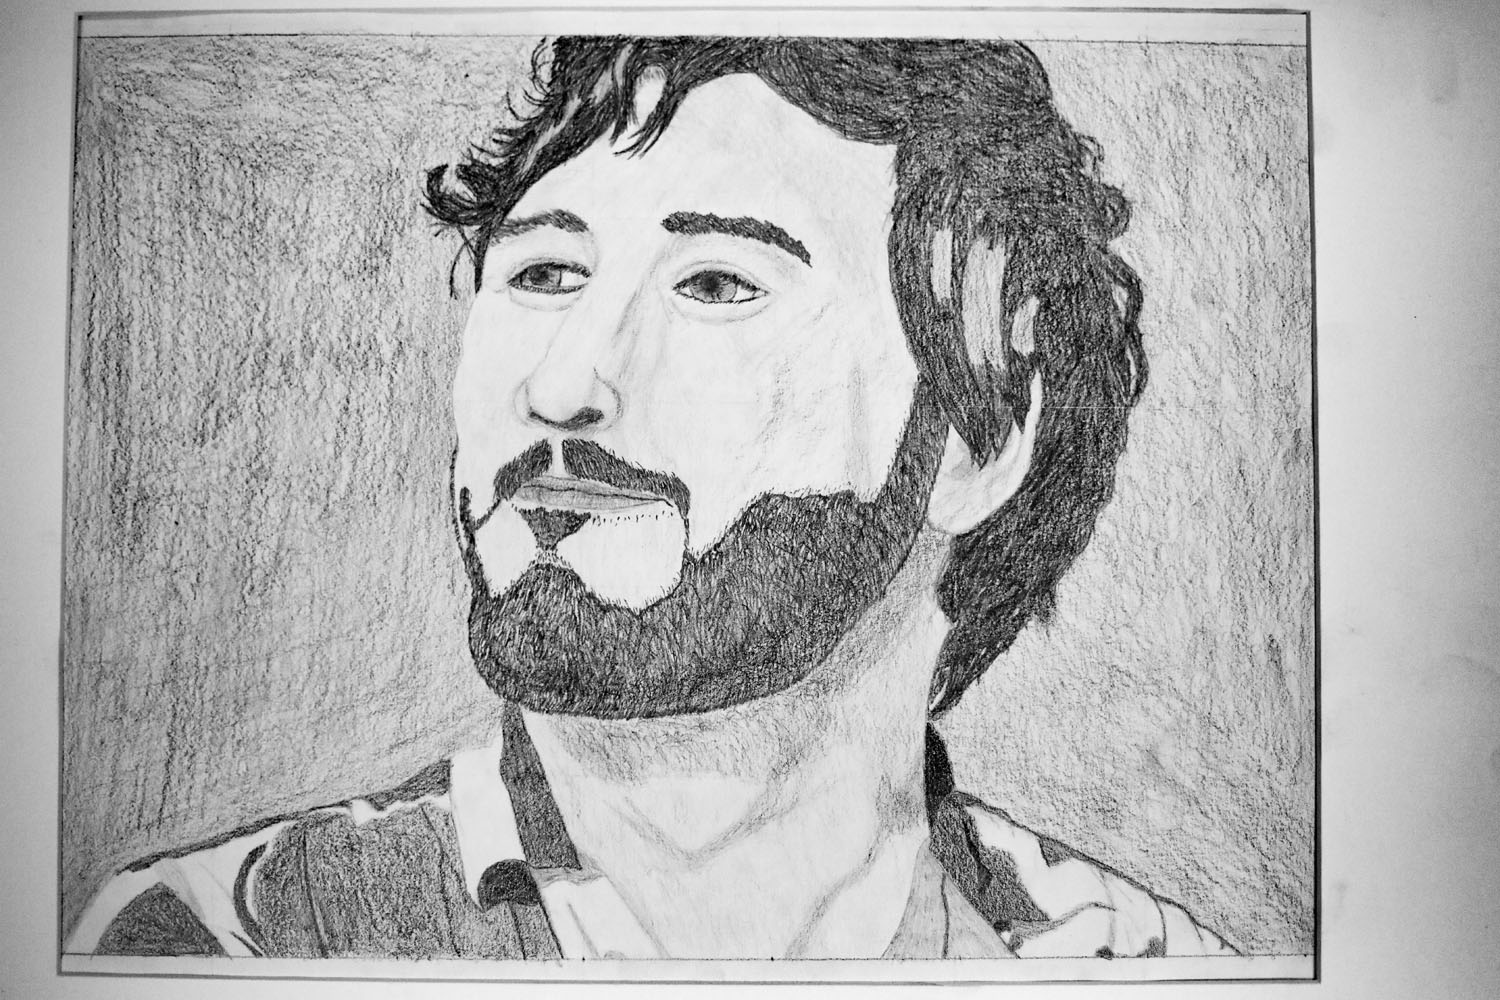 Pencil drawing of a man with a dark beard